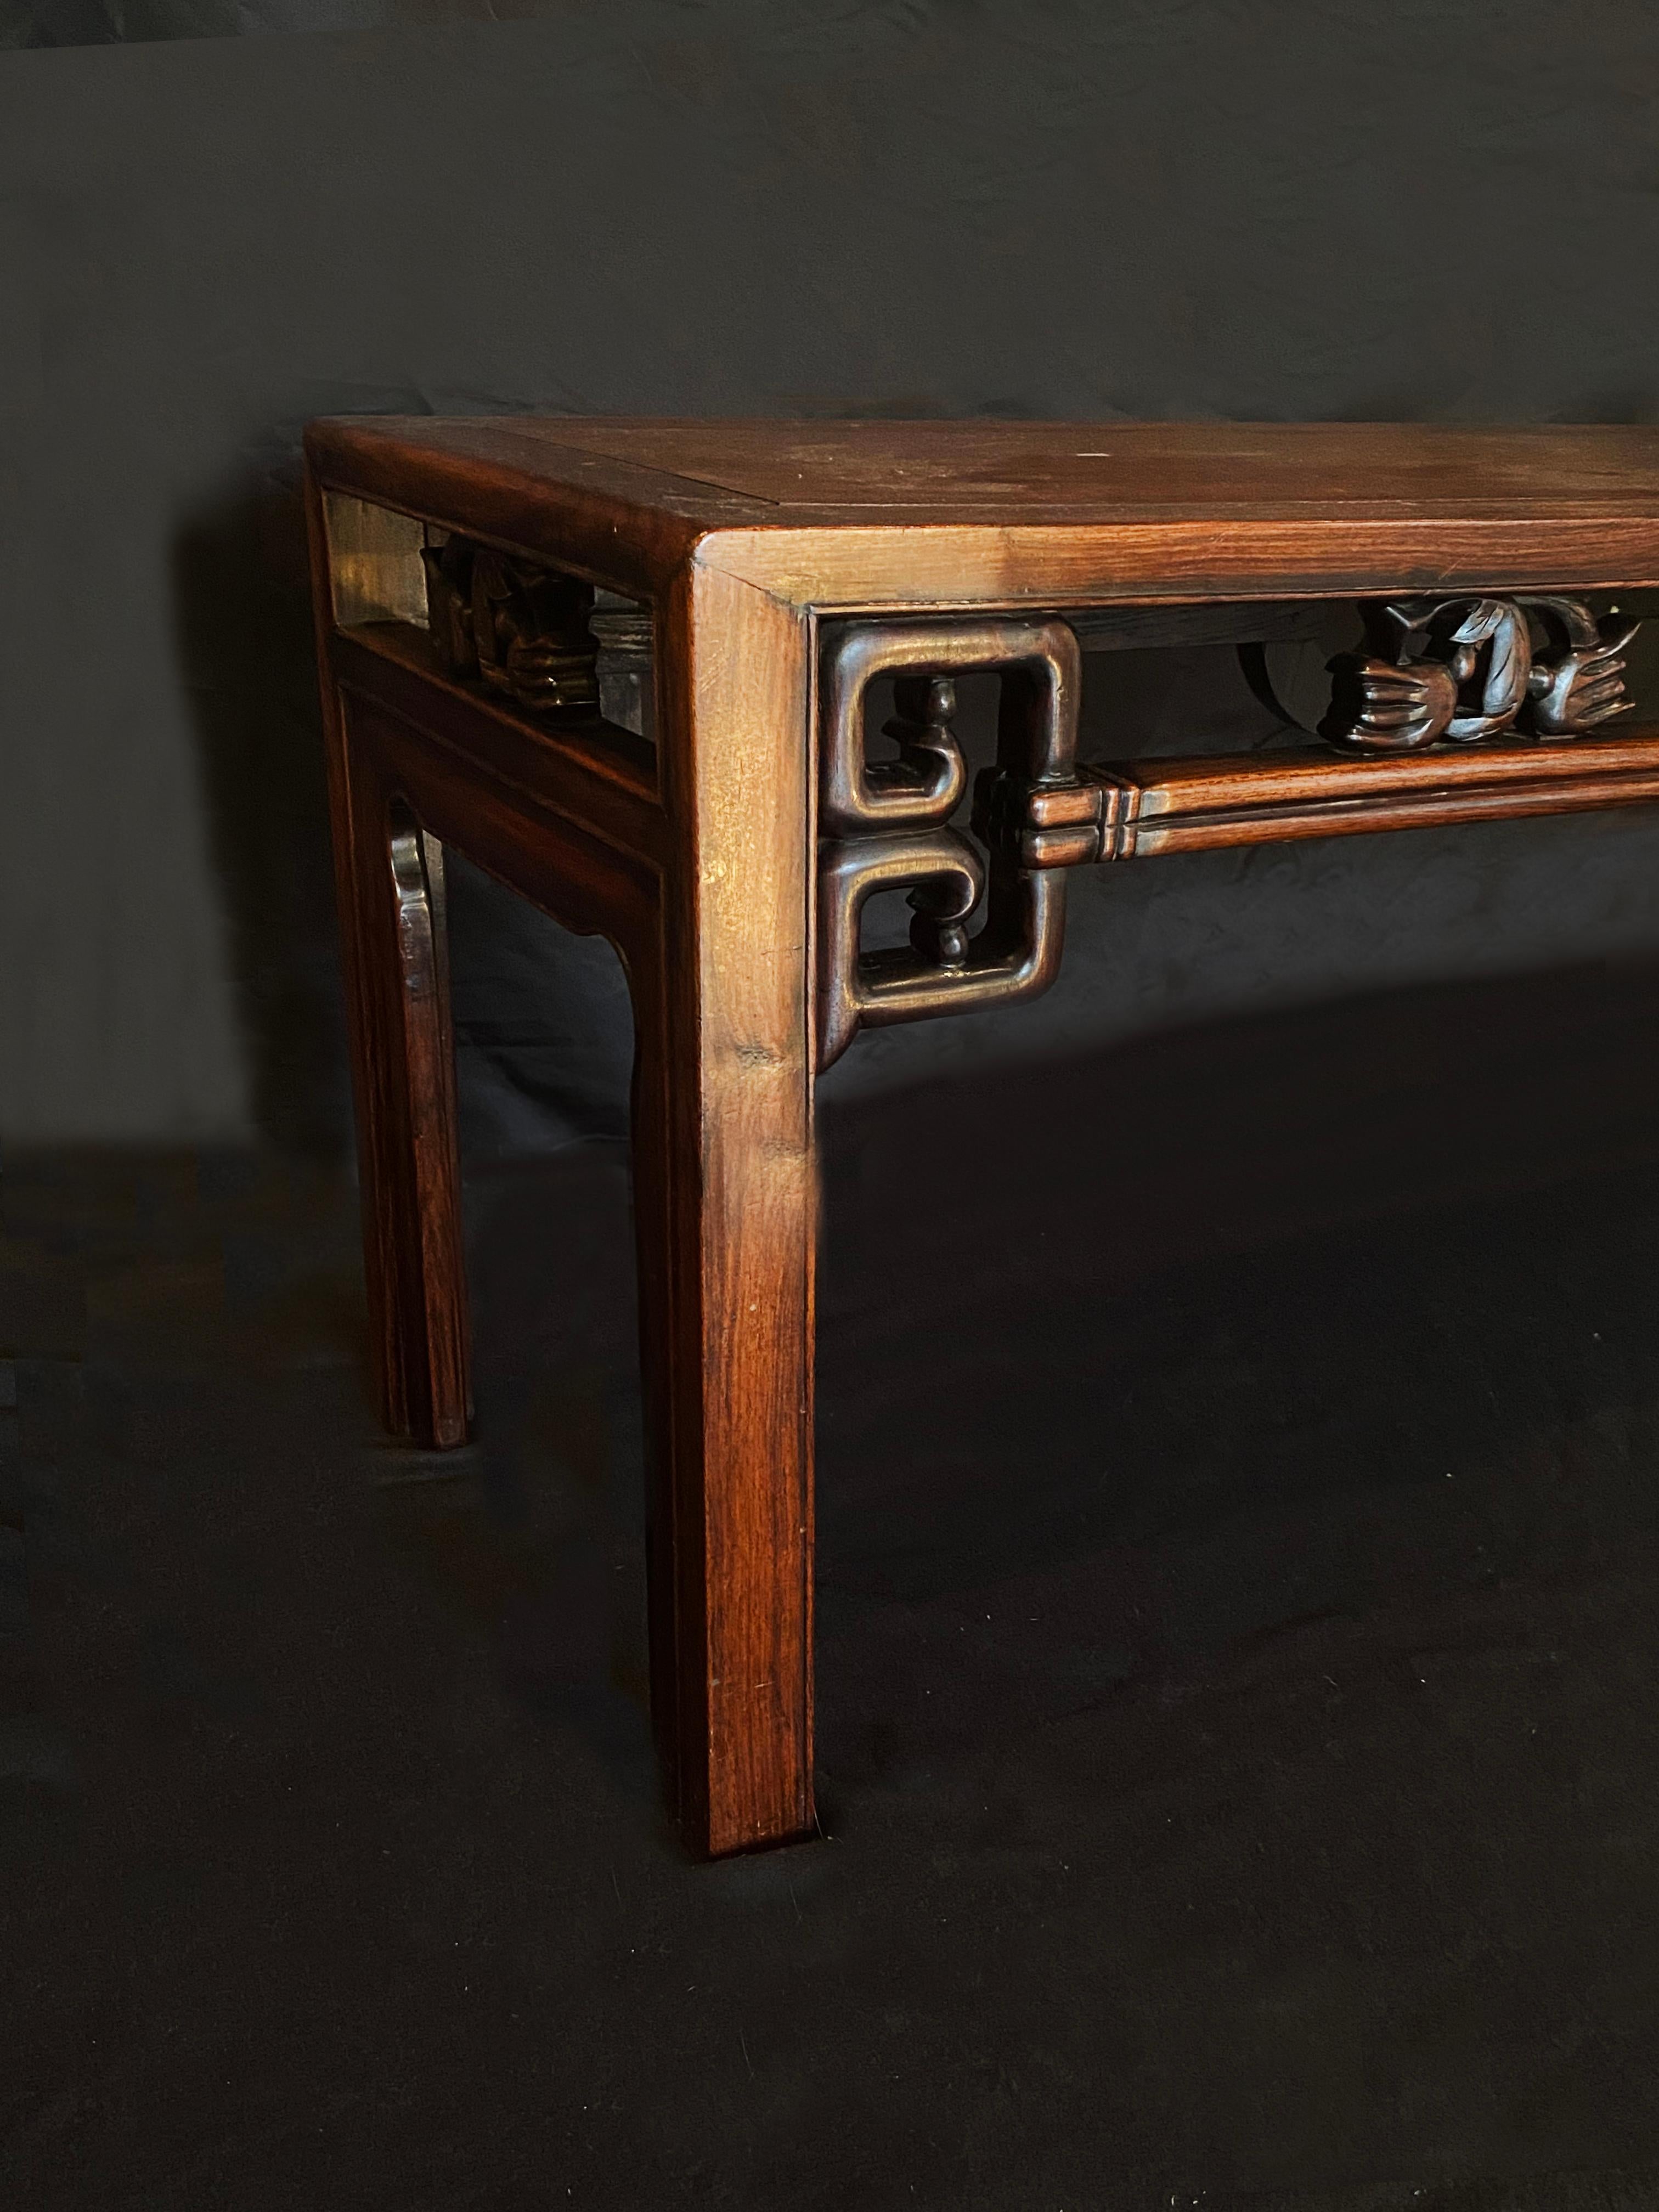 A Chinese mahogany low alter table inspired by Chinese design. An elegantly simple shape with intricate Chinese design details. The frieze has geometric features, as well as stylized flora and birds. A beautiful piece of furniture to add to any